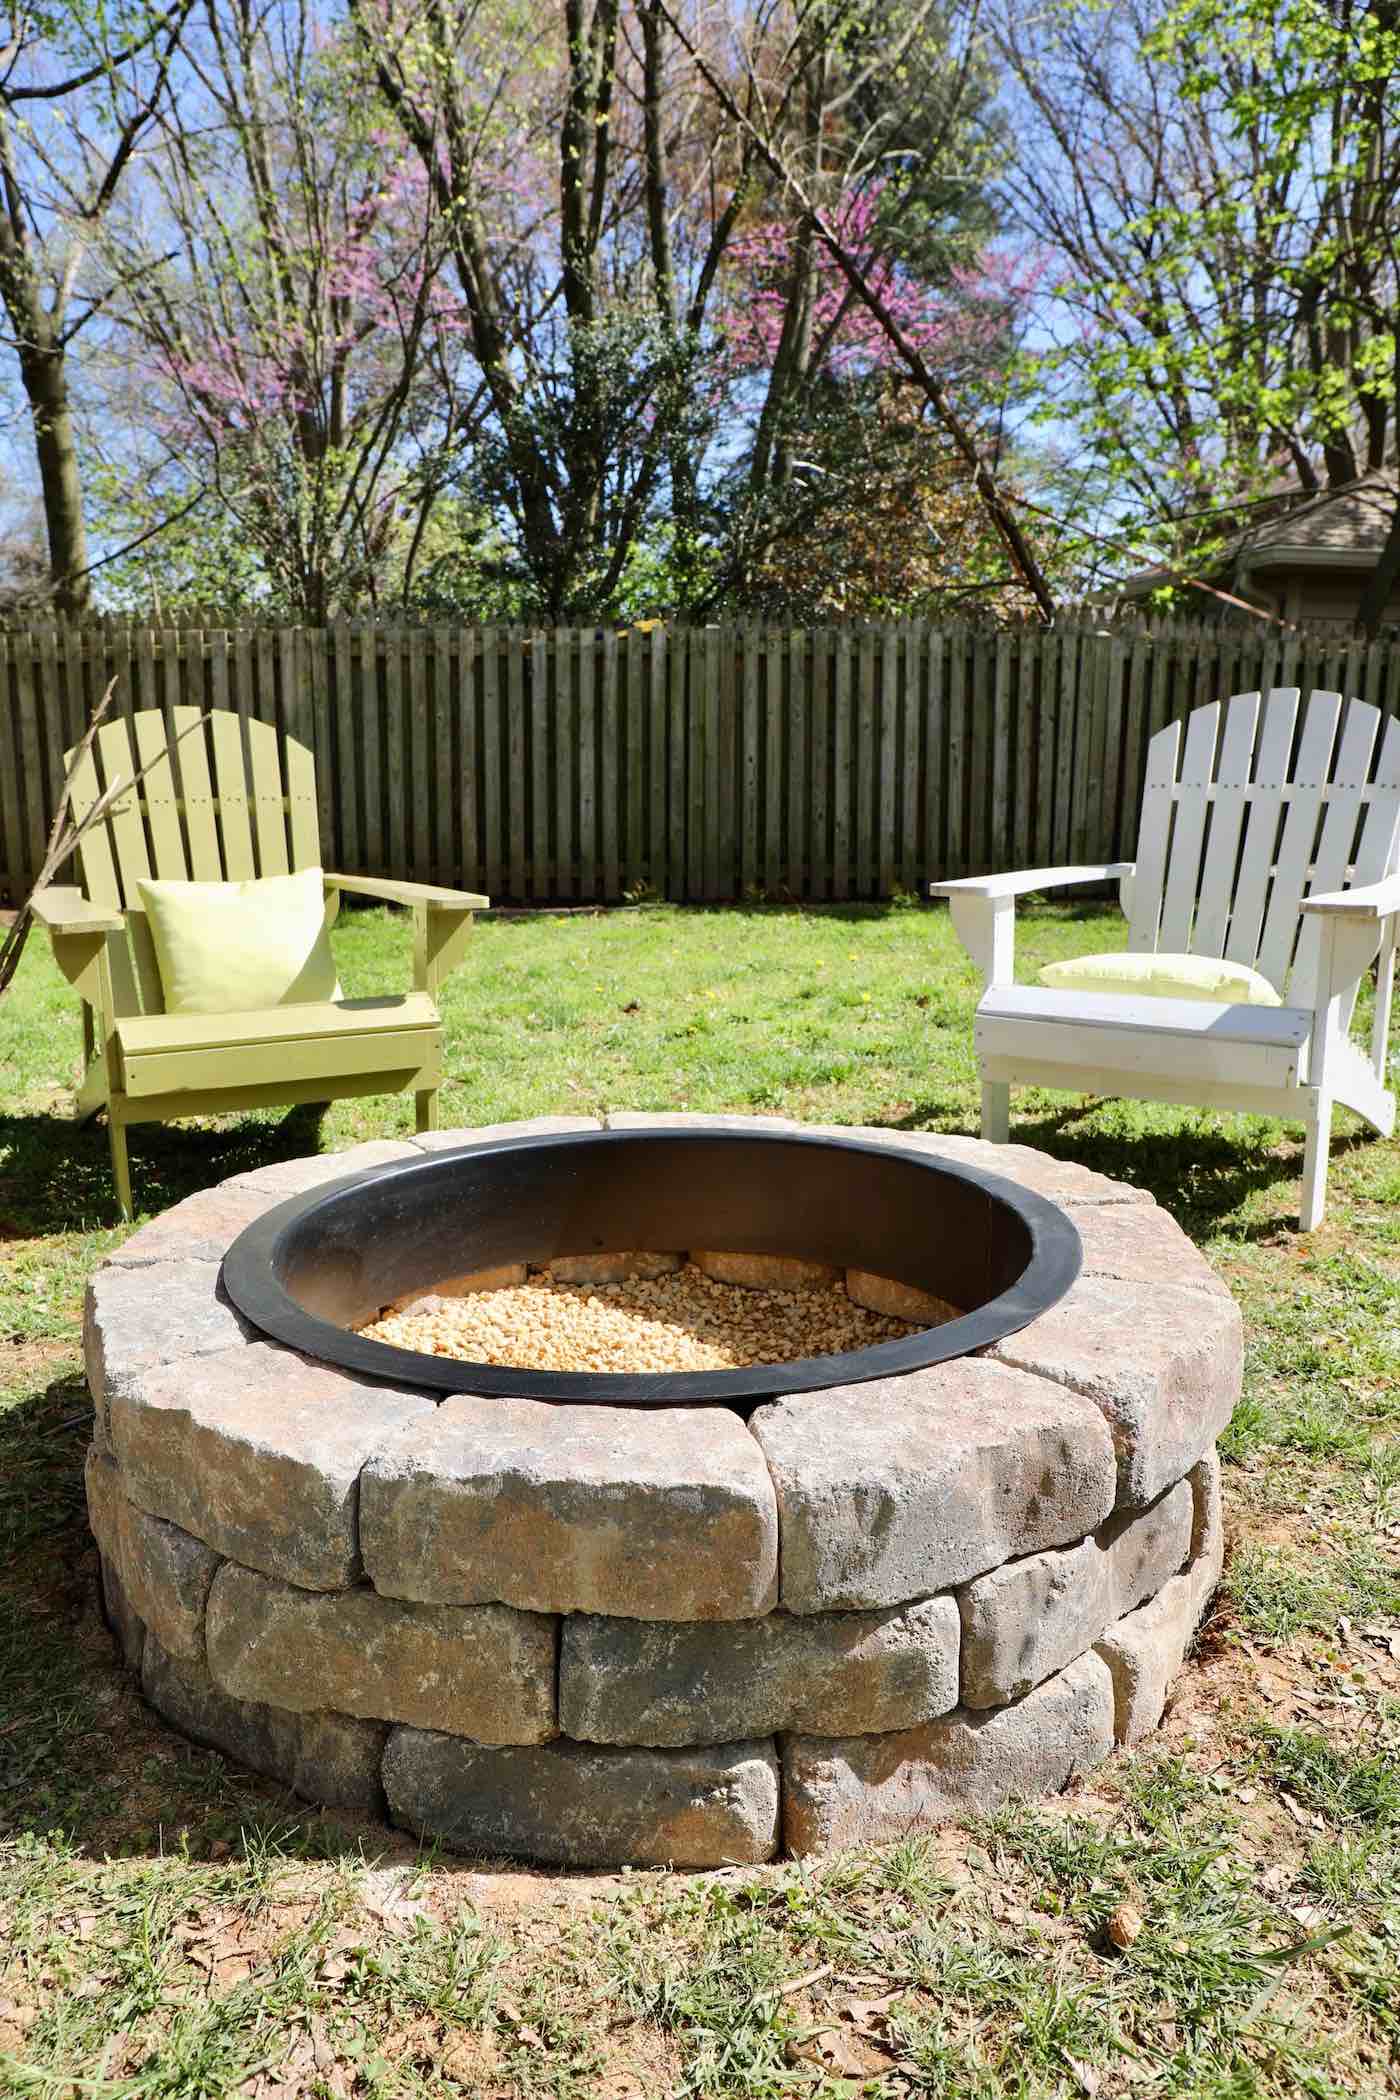 How to Build a DIY Fire Pit in Your Backyard - Thrift Diving